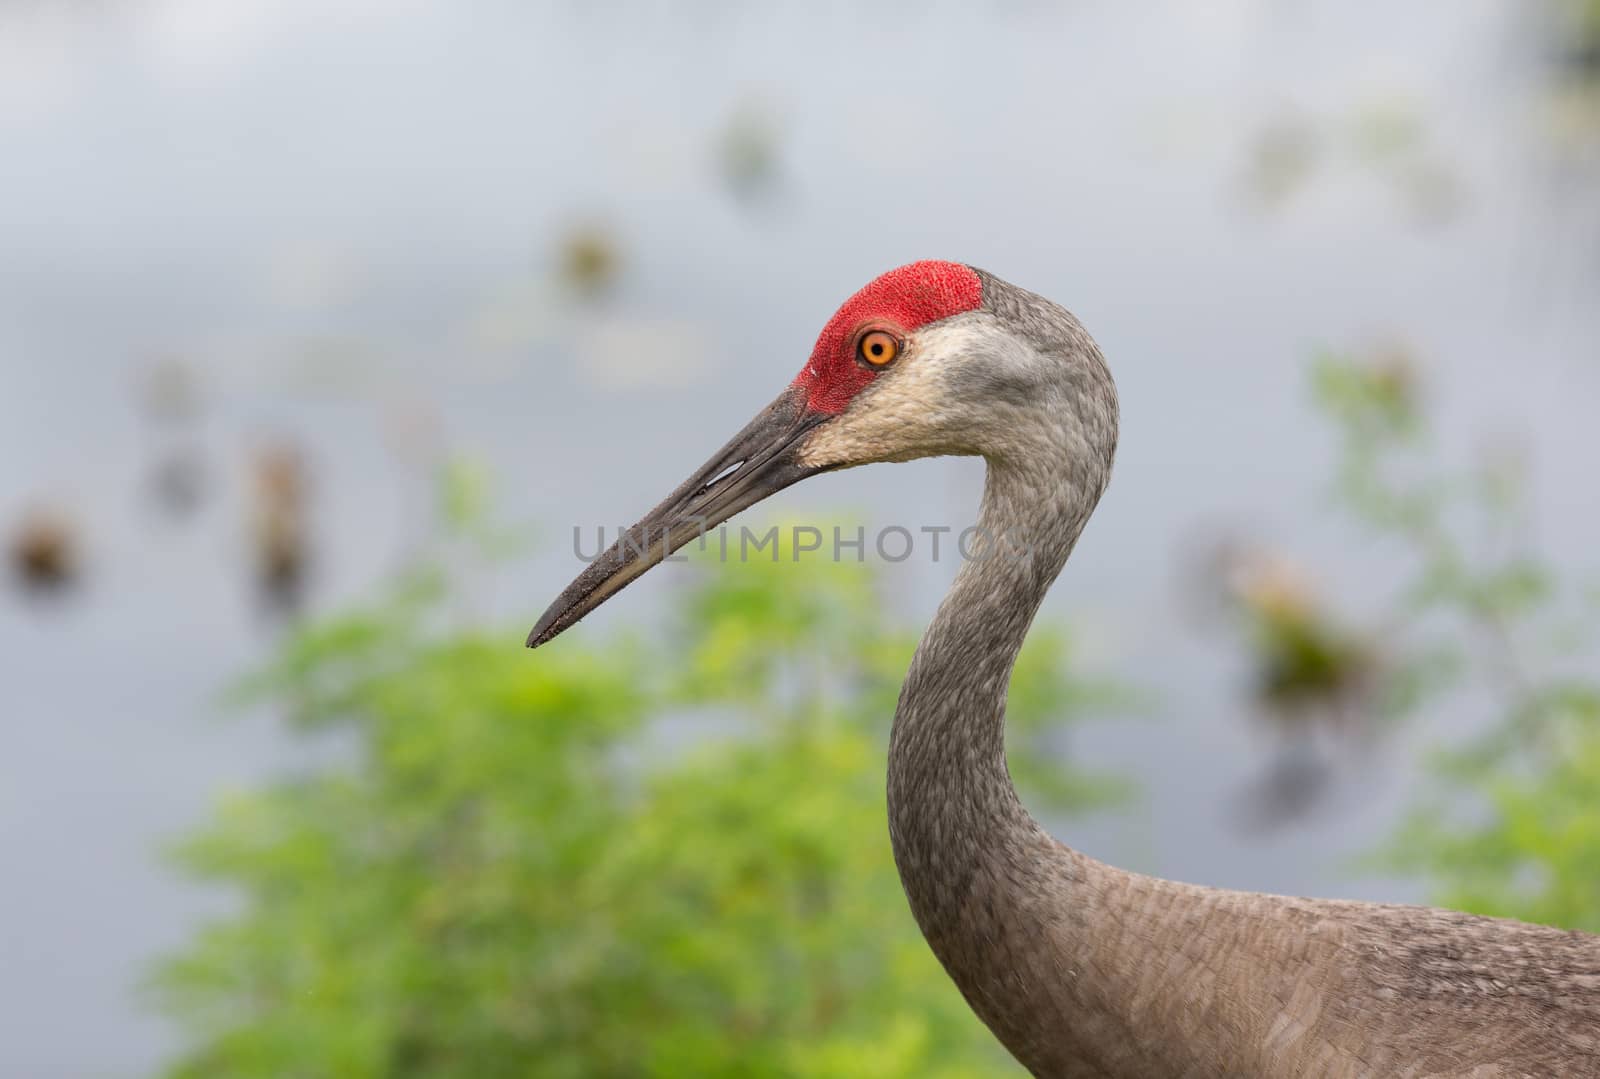 The Sandhill Crane is a year-round Florida resident. They are found in open fields or meadows. This one was in a local park in its never-ending quest for food.